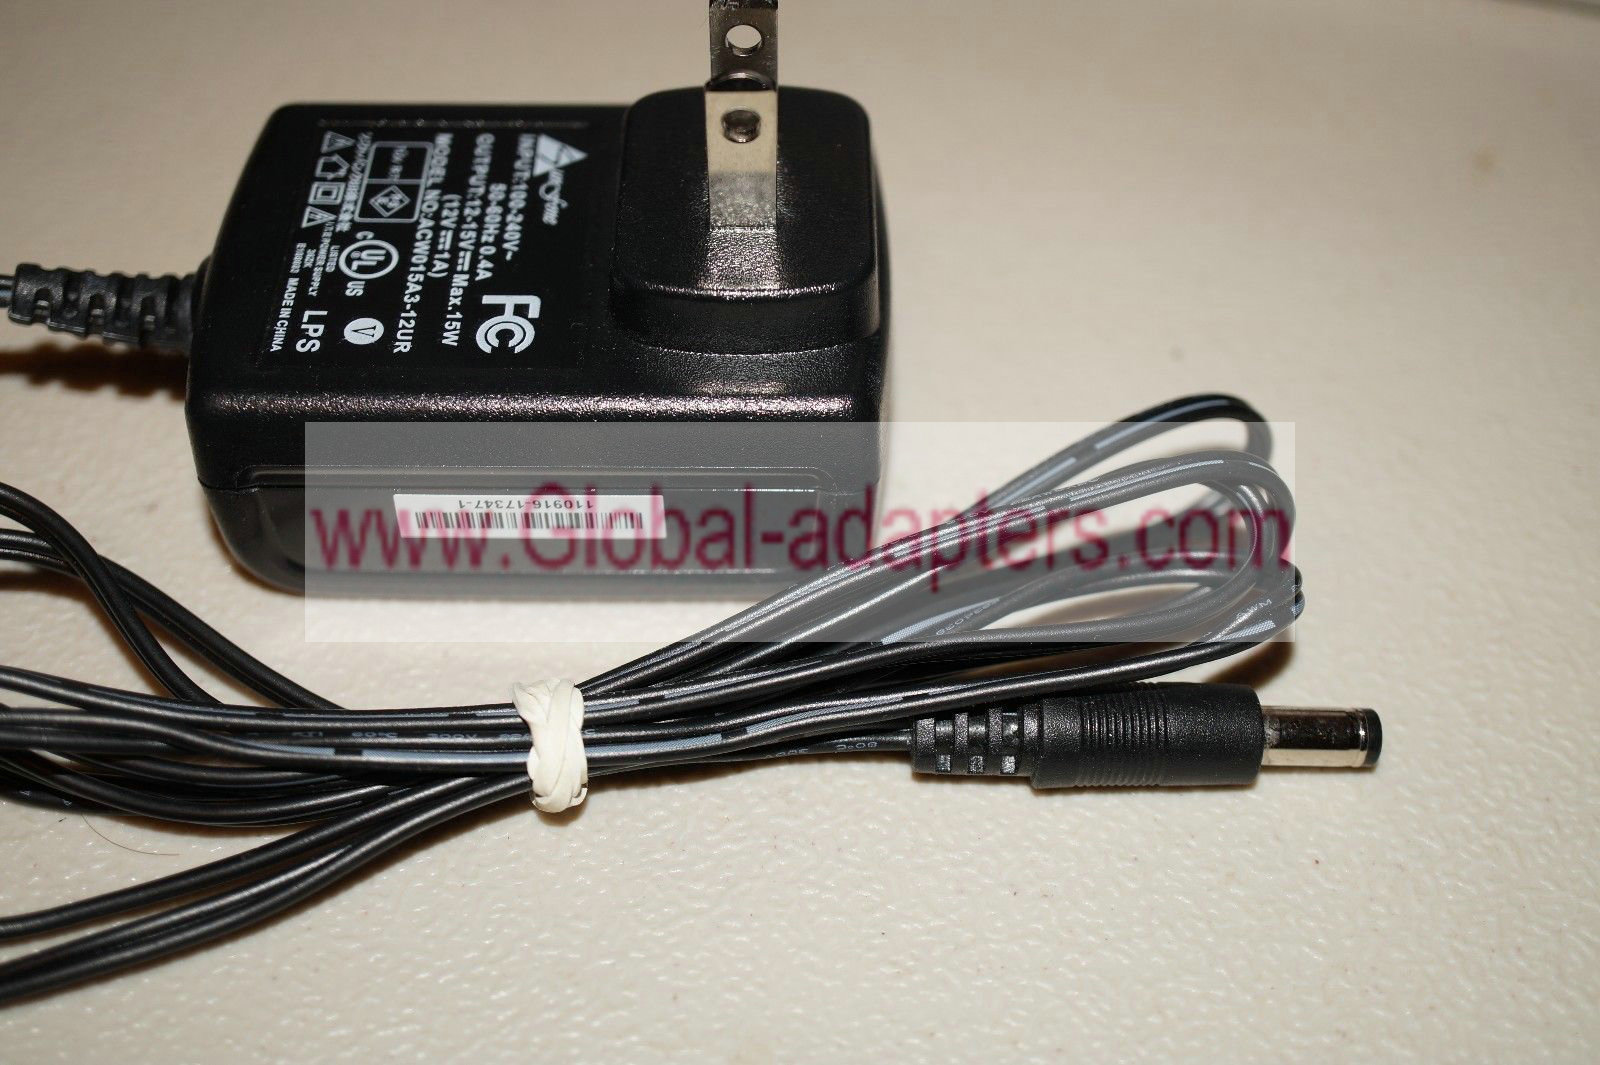 New Sunfone AC Power Adapter ACW015A3-12UR 12V 1A power supply charger - Click Image to Close